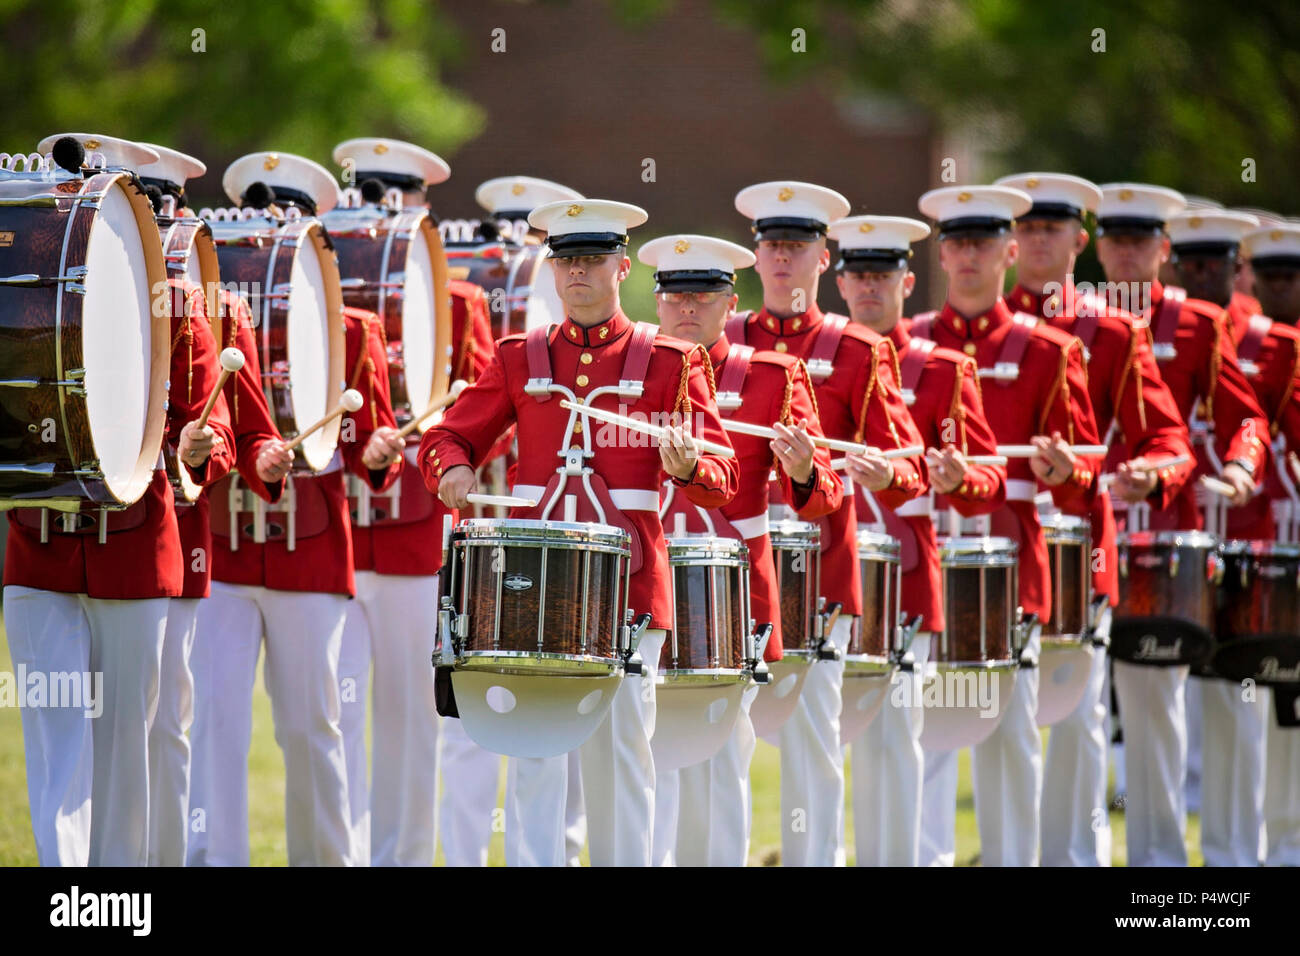 The U.S. Marine Drum & Bugle Corps march during the Centennial Celebration Ceremony at Lejeune Field, Marine Corps Base (MCB) Quantico, Va., May 10, 2017. The event commemorates the founding of MCB Quantico in 1917, and consisted of performances by the U.S. Marine Corps Silent Drill Platoon and the U.S. Marine Drum & Bugle Corps. Stock Photo